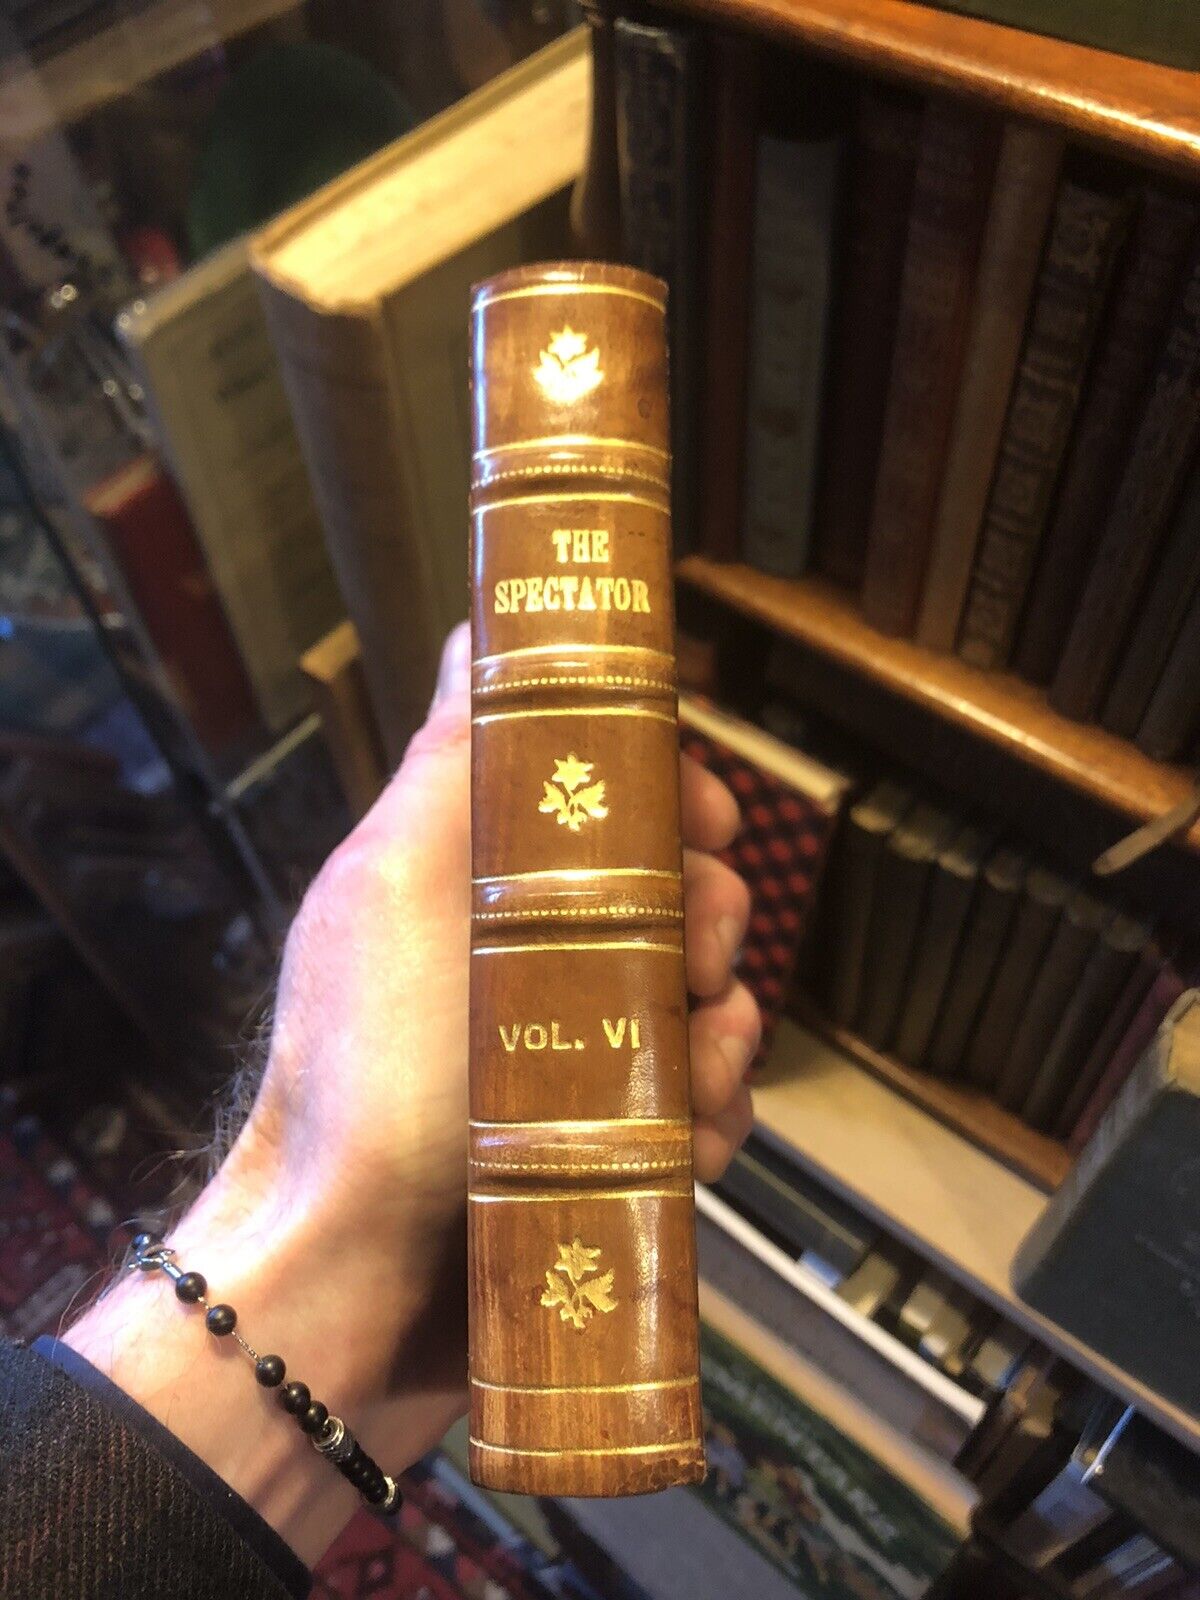 THE SPECTATOR Volume 6 : Lovely Leather Binding : Printed by Robert Carr 1803 :